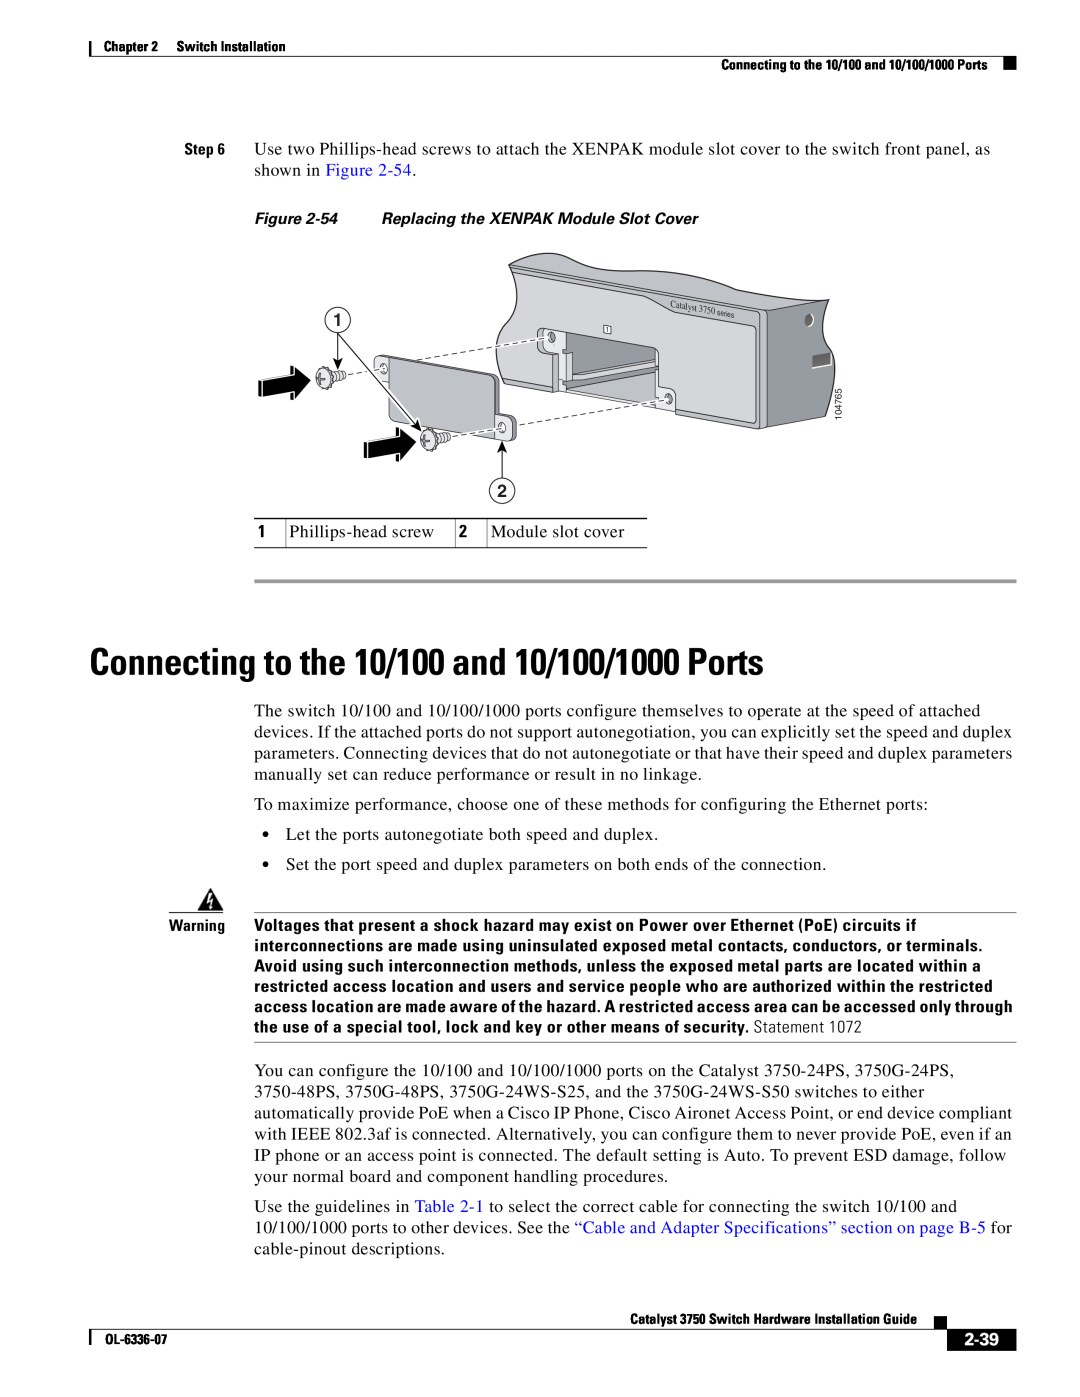 Cisco Systems WSC3750X24TS specifications Connecting to the 10/100 and 10/100/1000 Ports, 2-39 